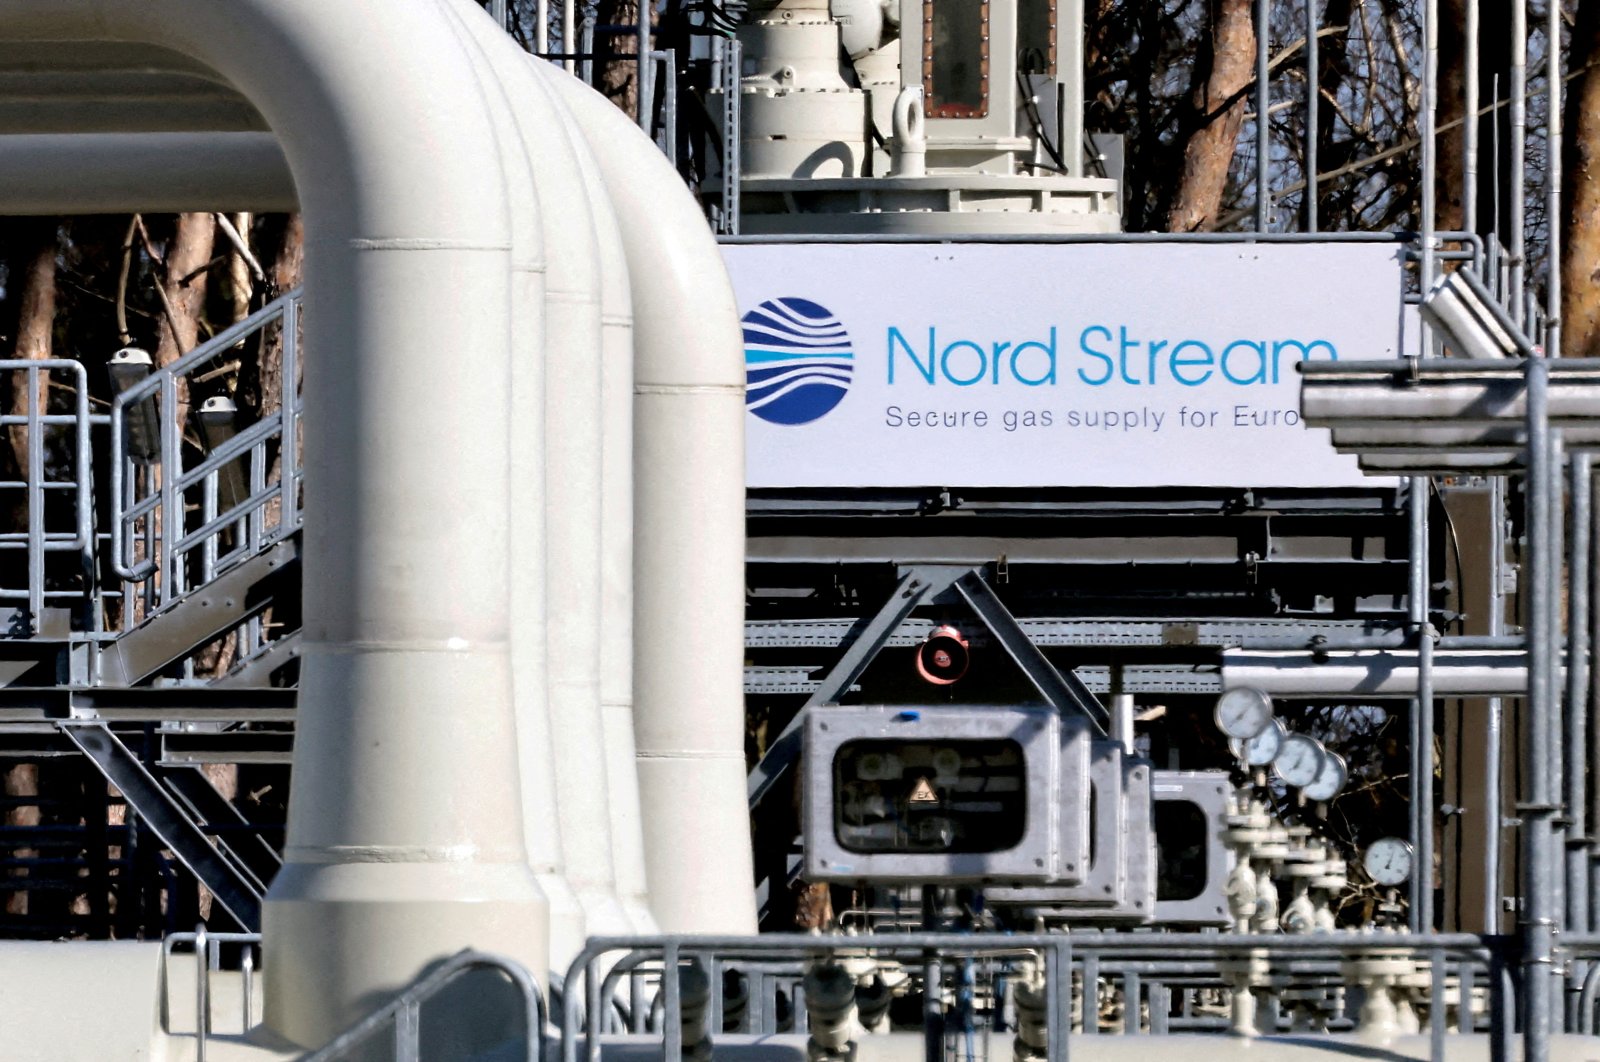 Pipes at the landfall facilities of the Nord Stream 1 gas pipeline are pictured in Lubmin, Germany, March 8, 2022. (Reuters Photo)